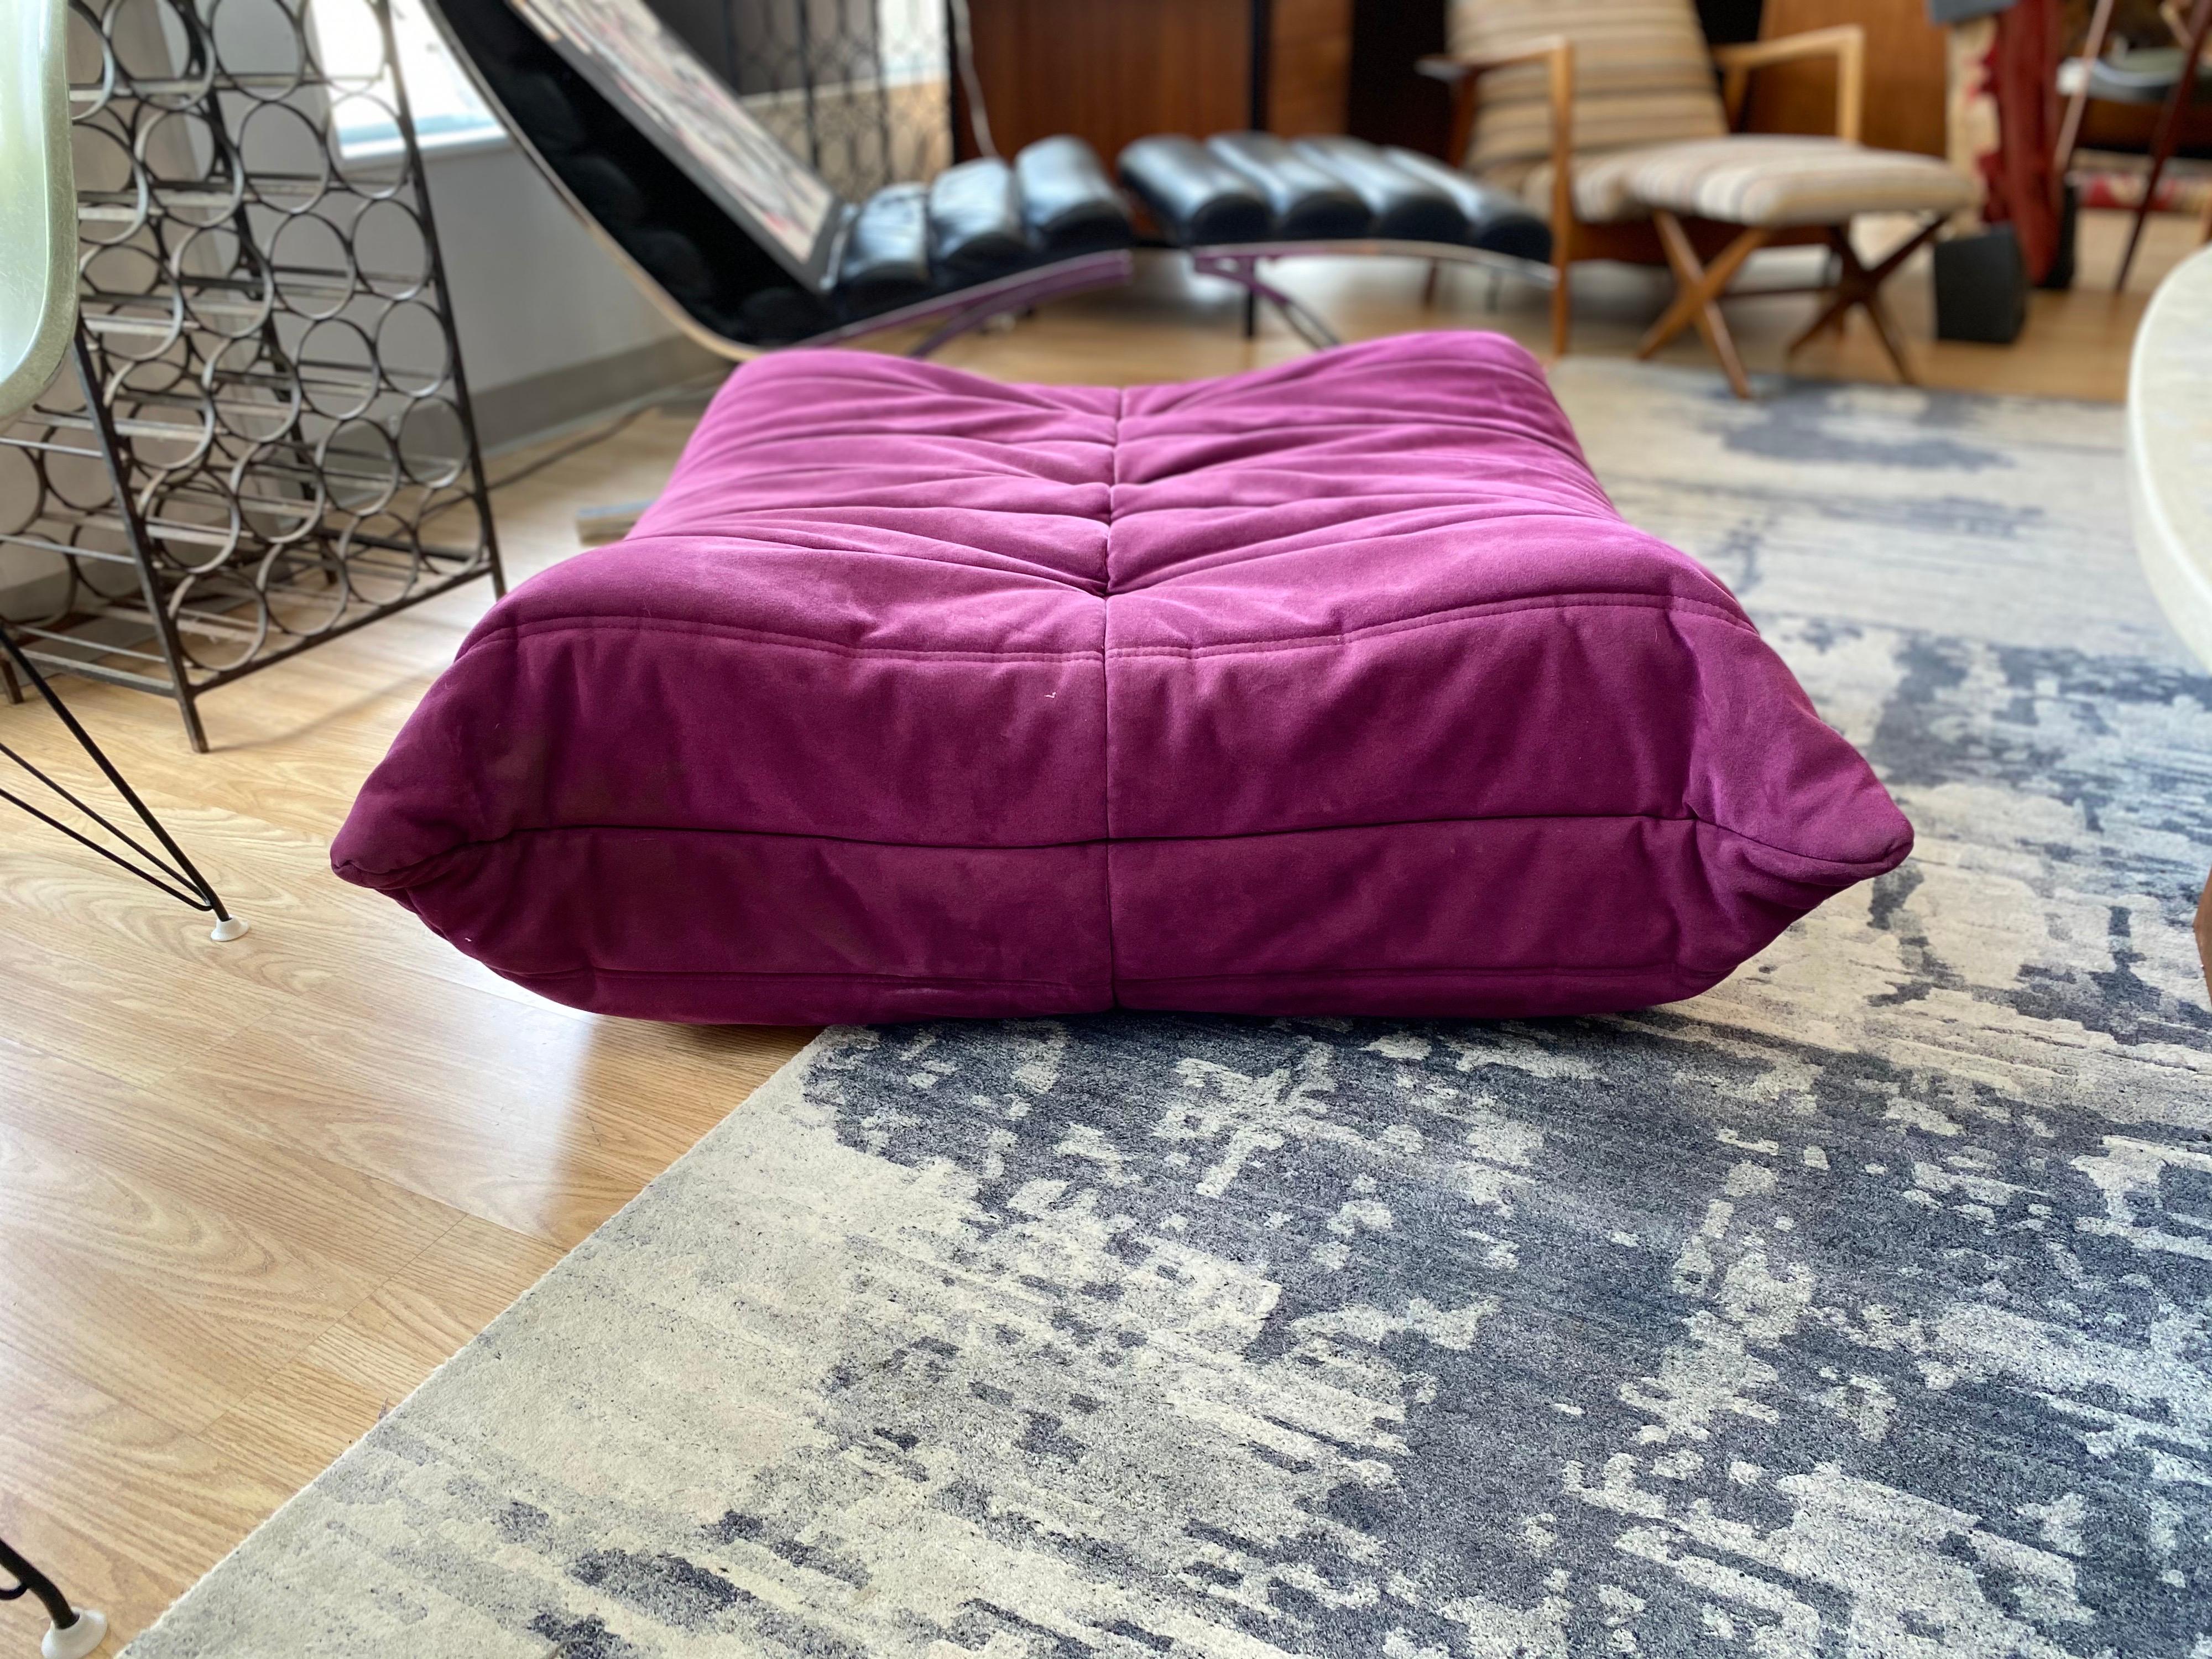 Comfort and style for over 40 years, Michael Ducaroy's Togo is timeless. For lounging or as a statement piece for your space, this Togo ottoman is visually appealing with its ergonomic design and multiple density foam construction. This stunning